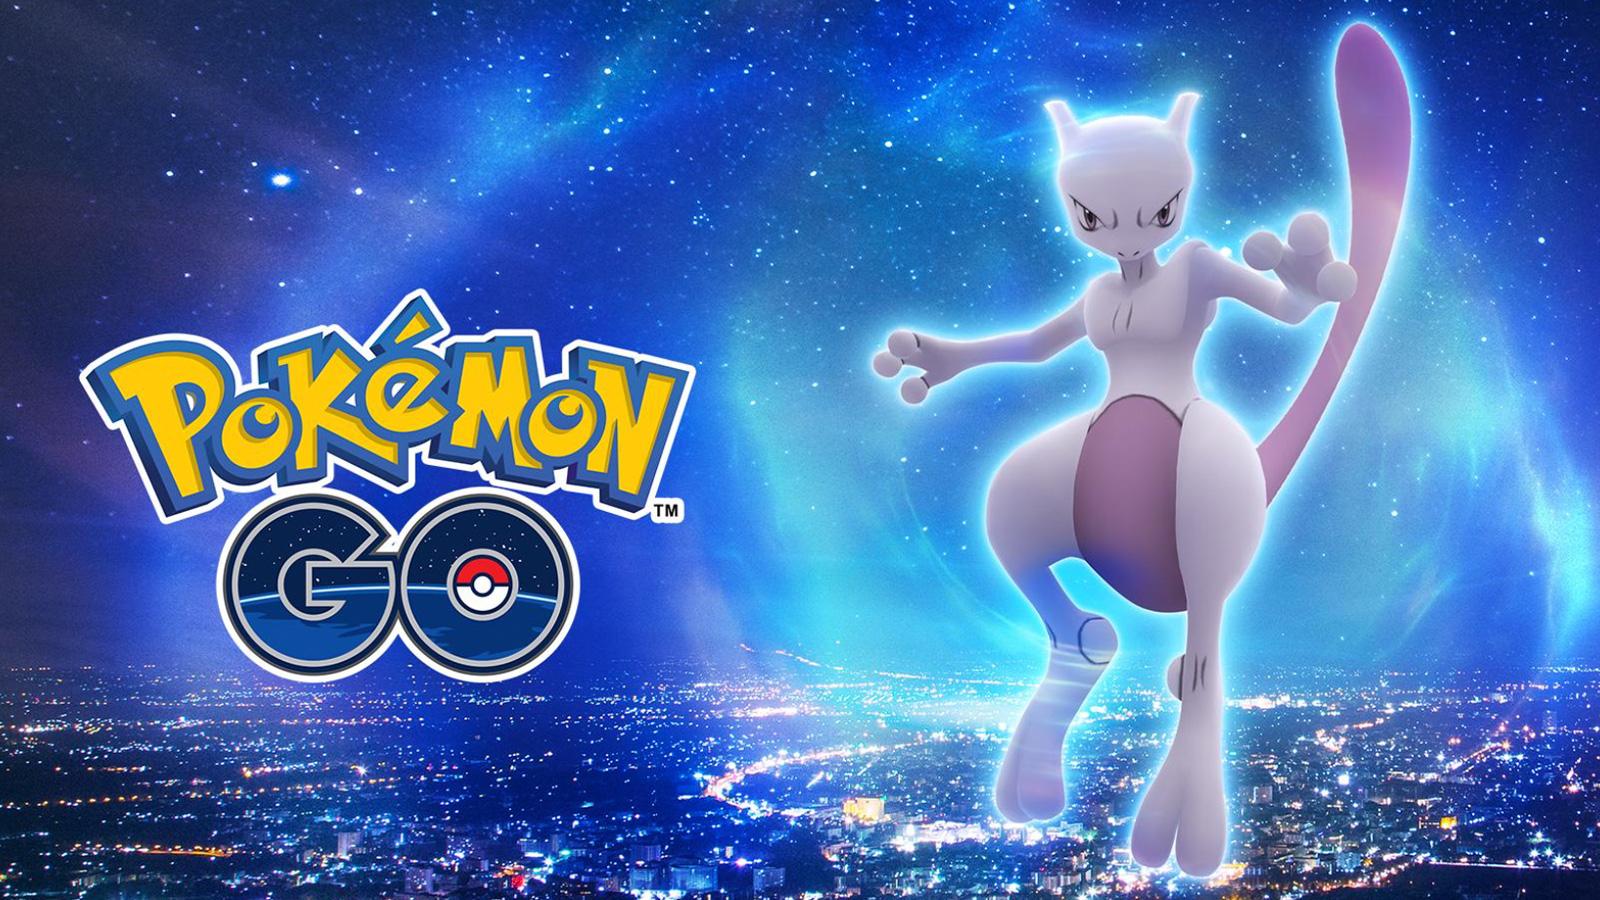 Which Pokemon you should use your Elite TMs on in Pokemon Go - Dexerto